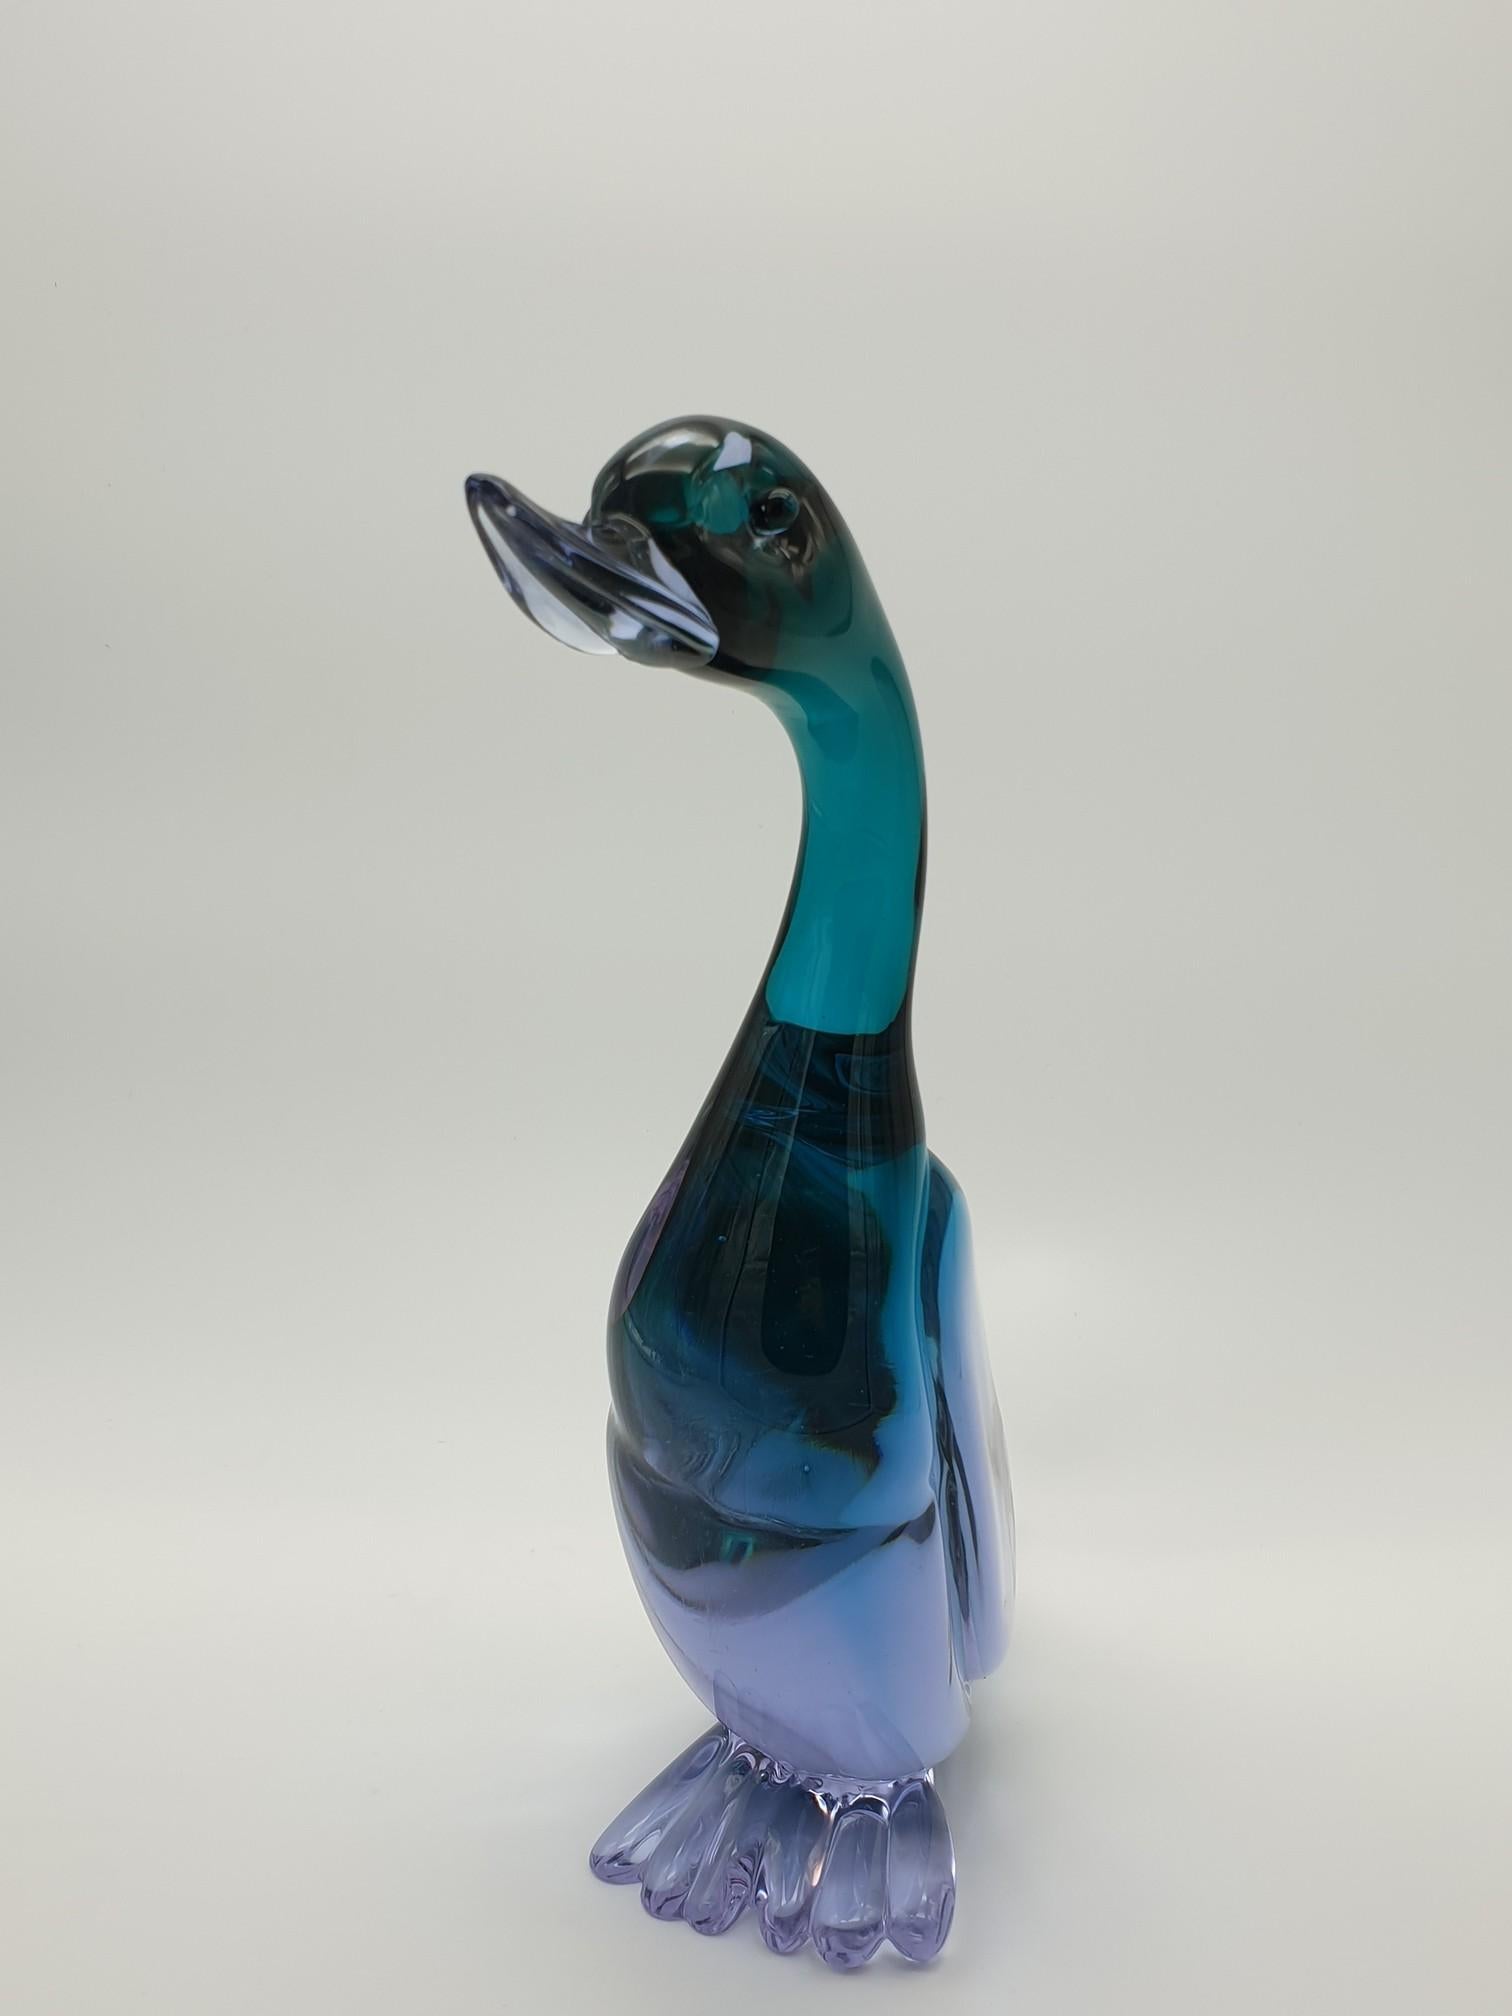 Large Murano glass duck, 39cm tall, made in the 1970s in the island of Murano (Venice, Italy) by the glass-factory Gino Cenedese e Figlio. The lavender color made at Cenedese is very attractive and peculiar, as its hue changes depending on the